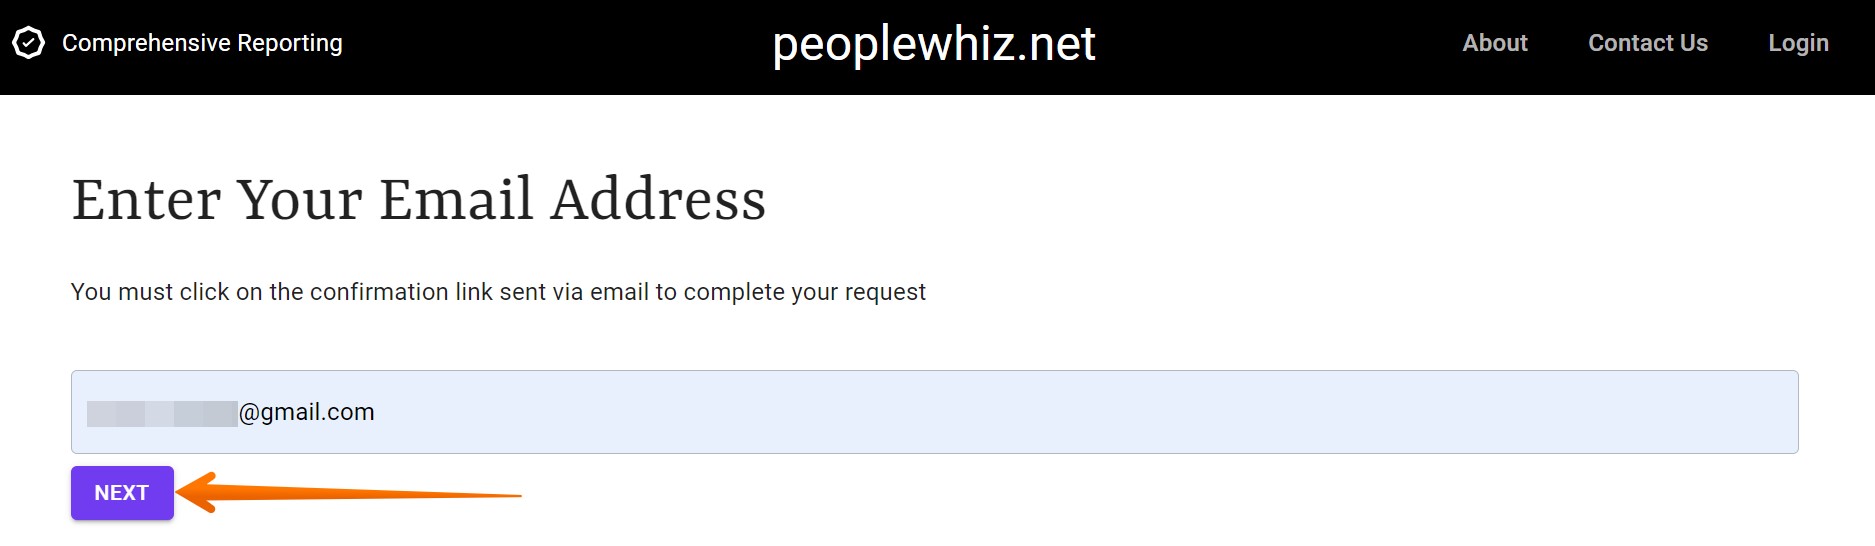 Provide a valid email address to receive a verification email from PeopleWhiz.net and click the "Next" button